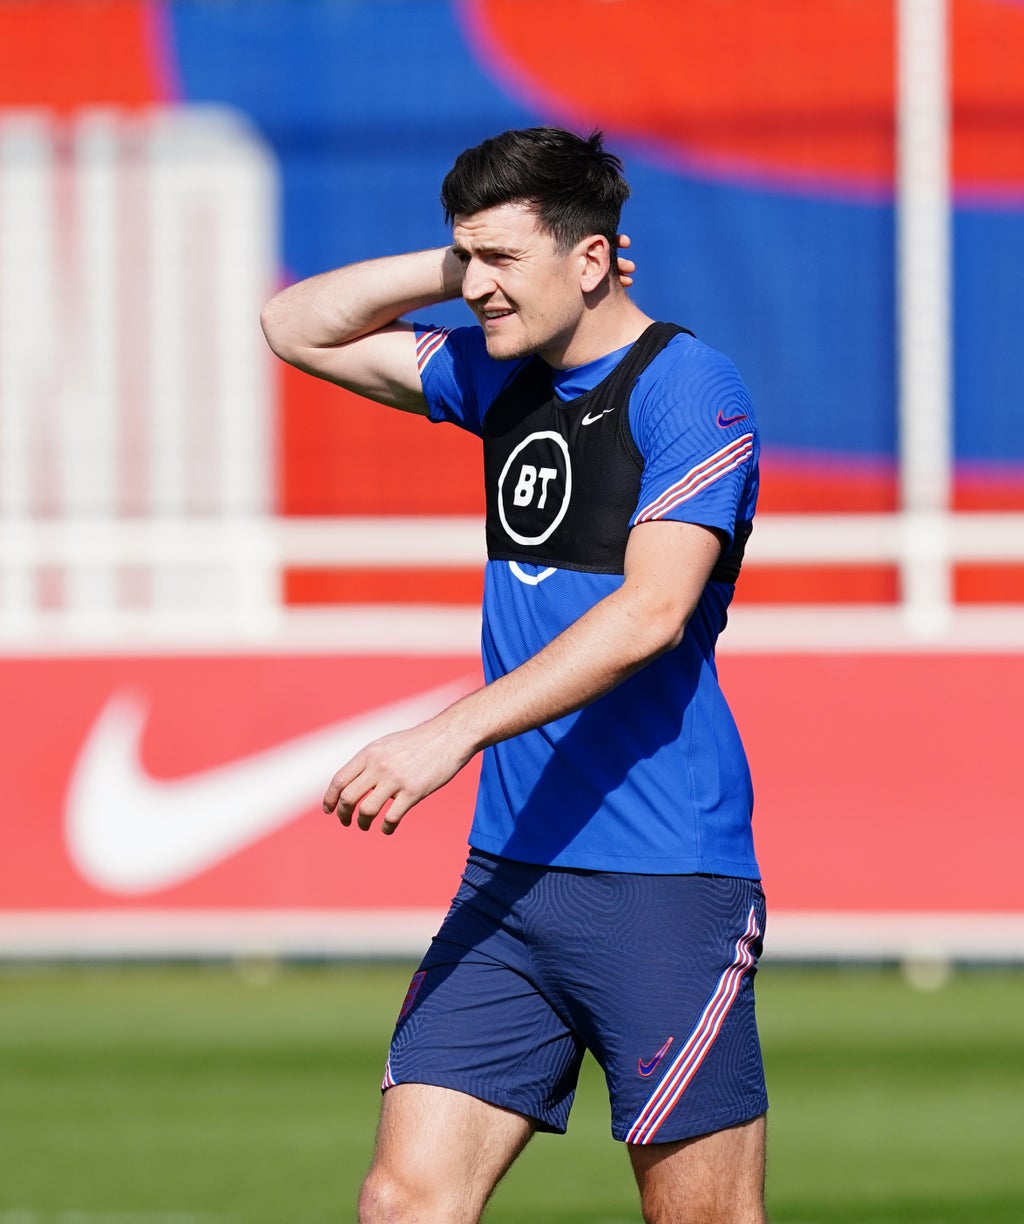 Mikel Arteta thinks England fans booing Harry Maguire is counterproductive